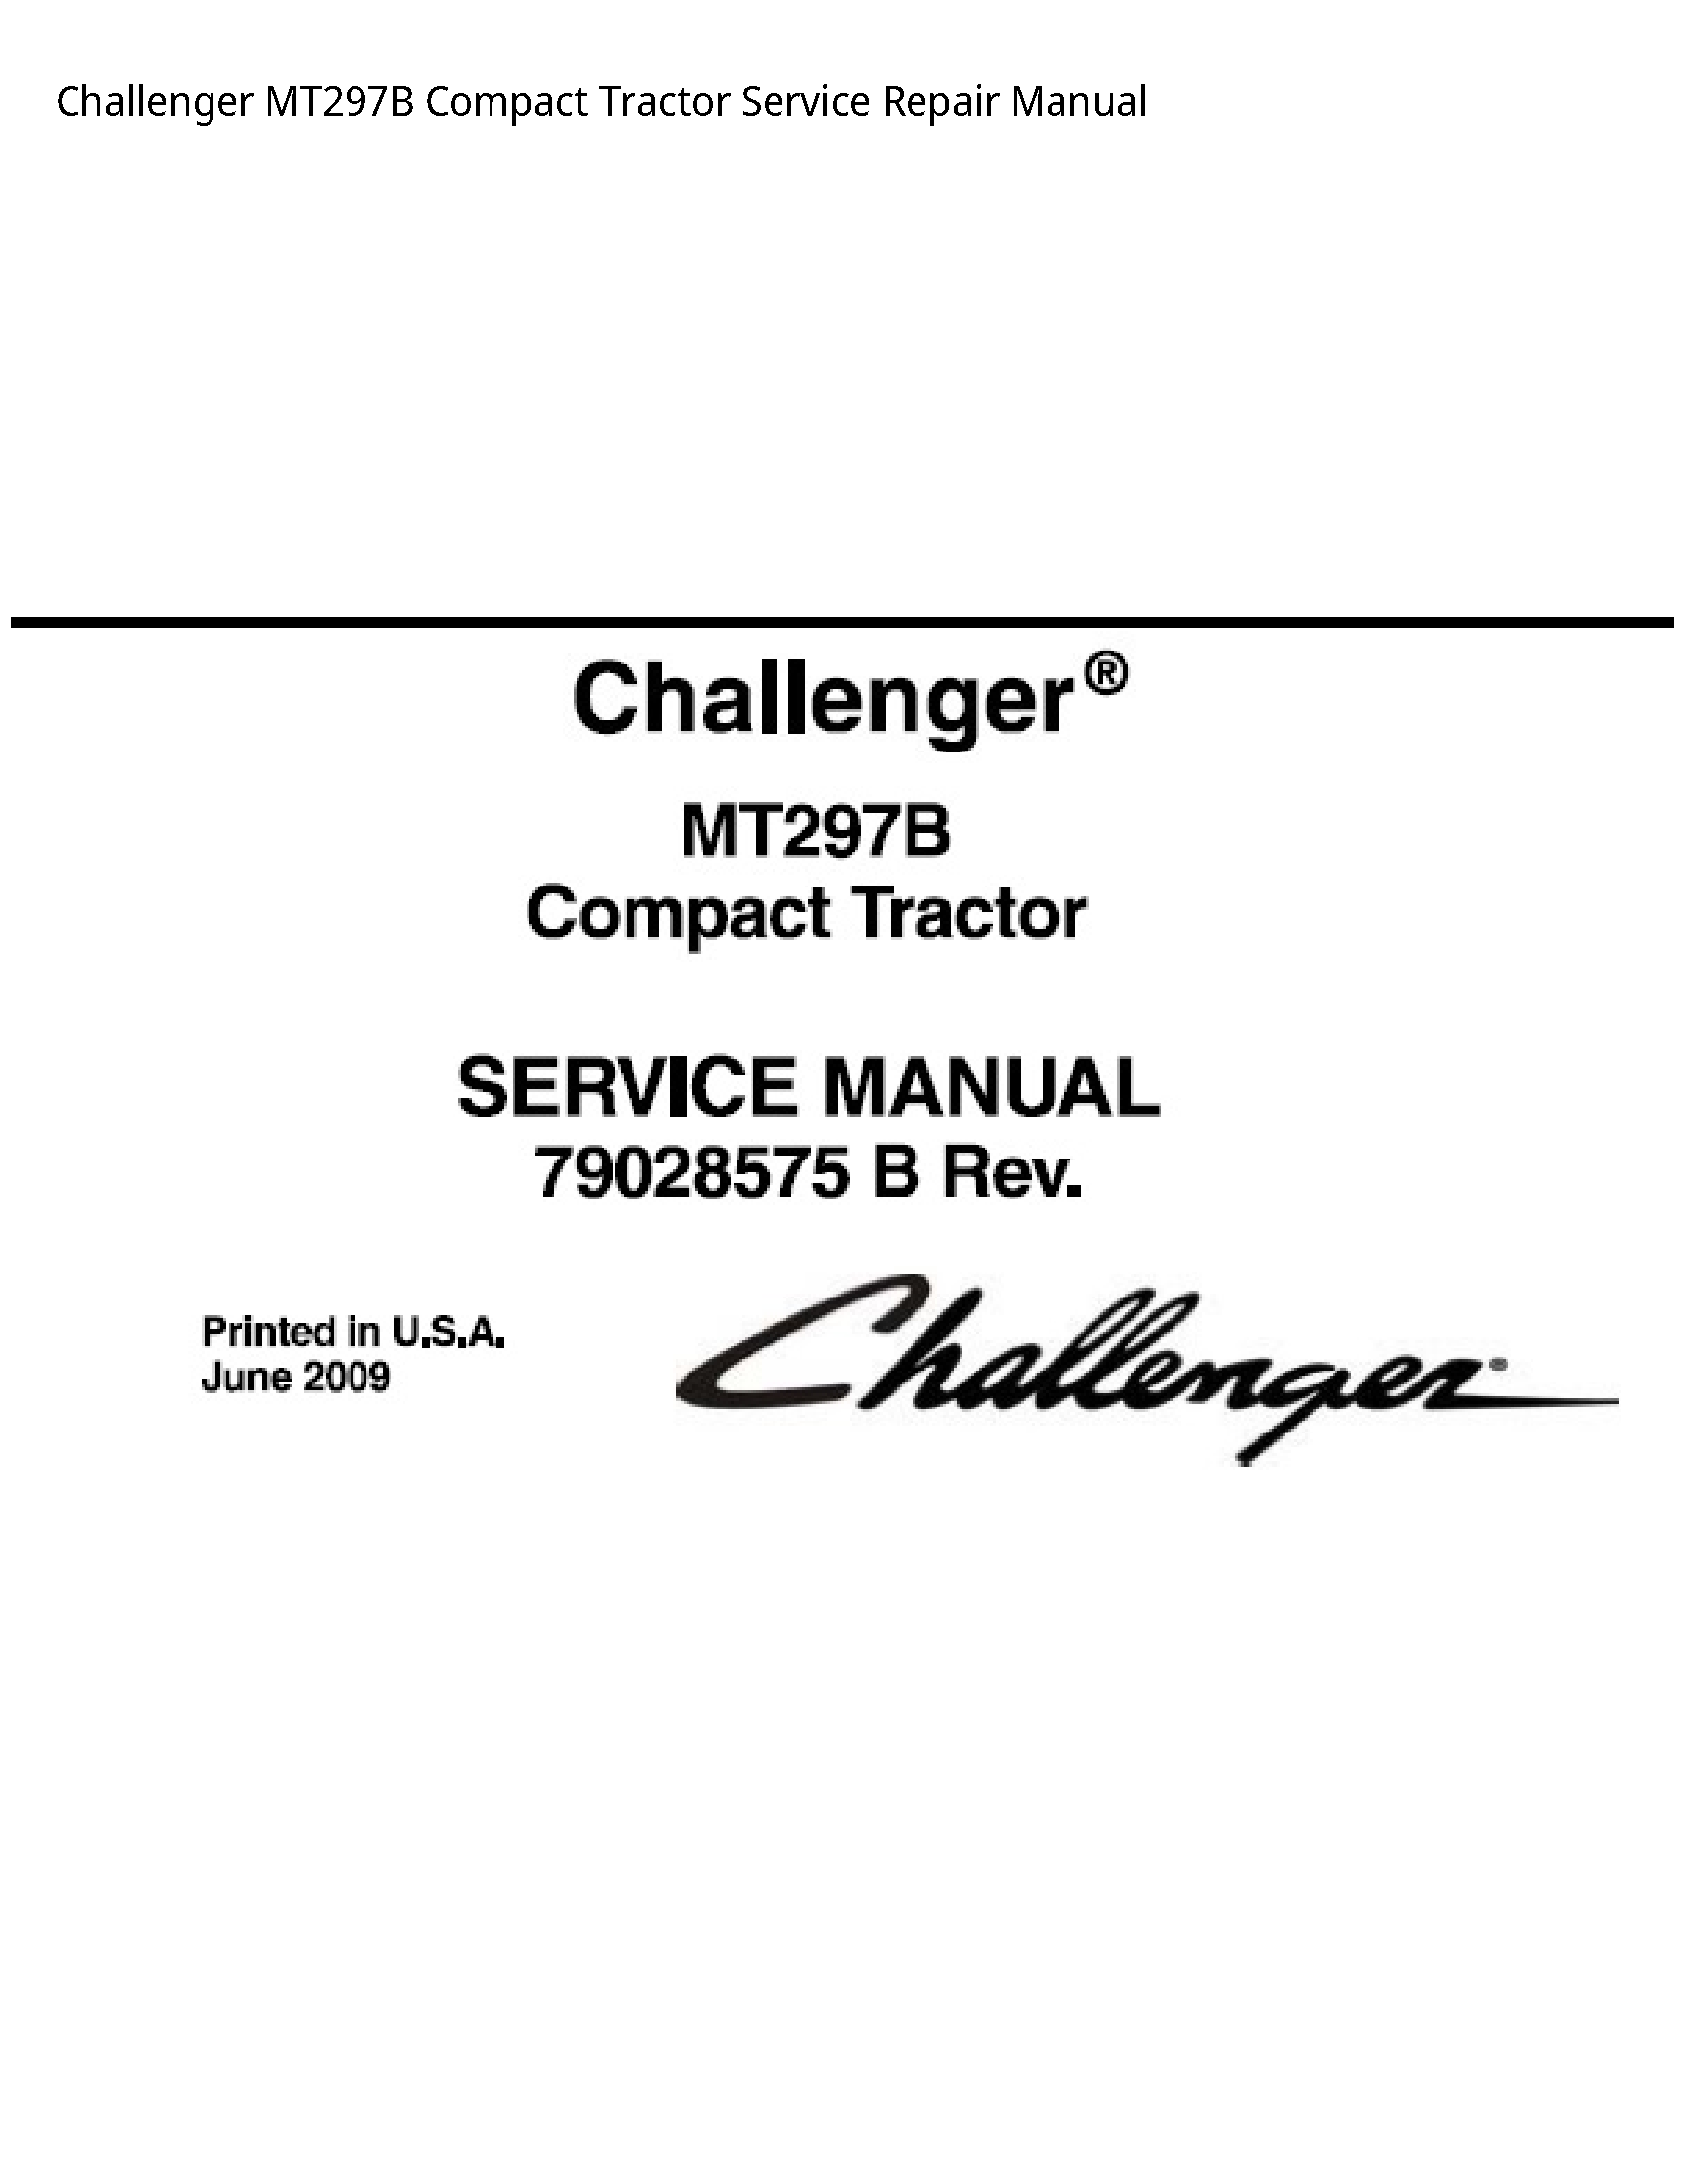 Challenger MT297B Compact Tractor manual